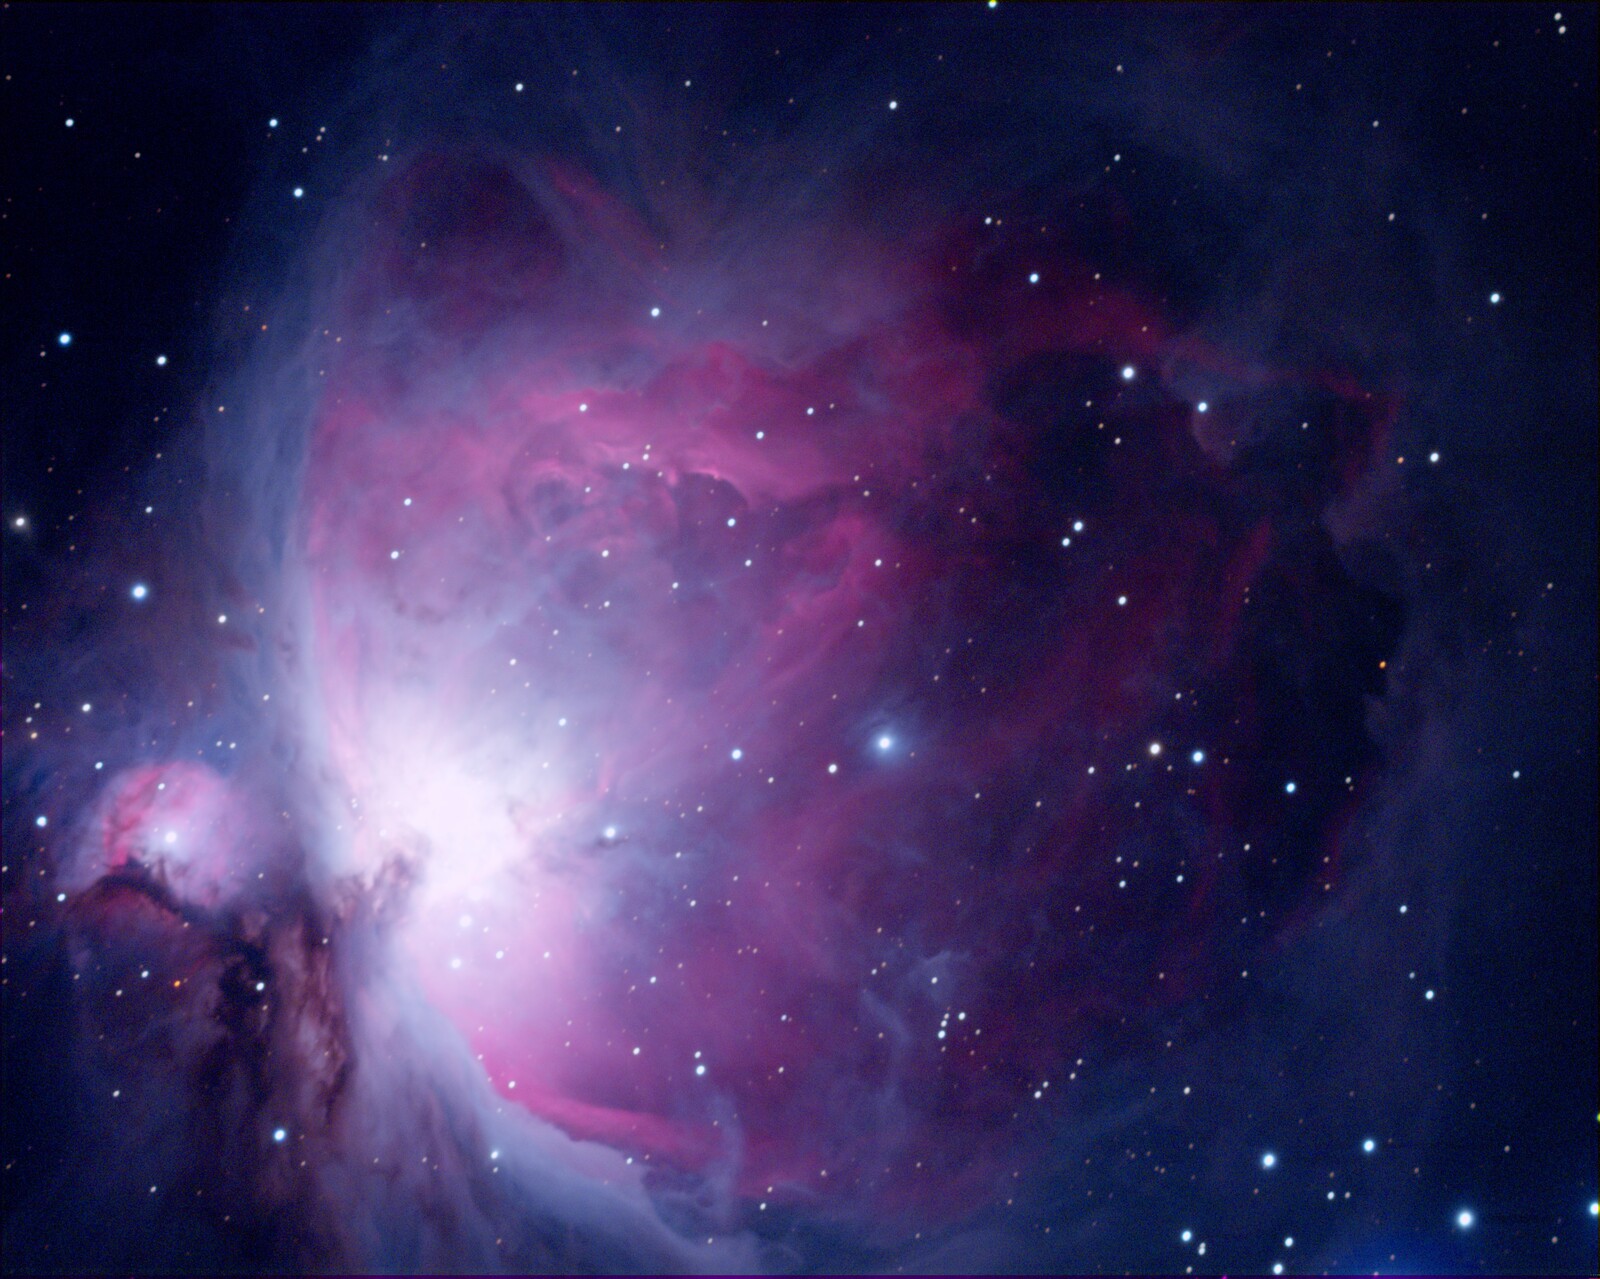 M42 - Ohhh ... Rion